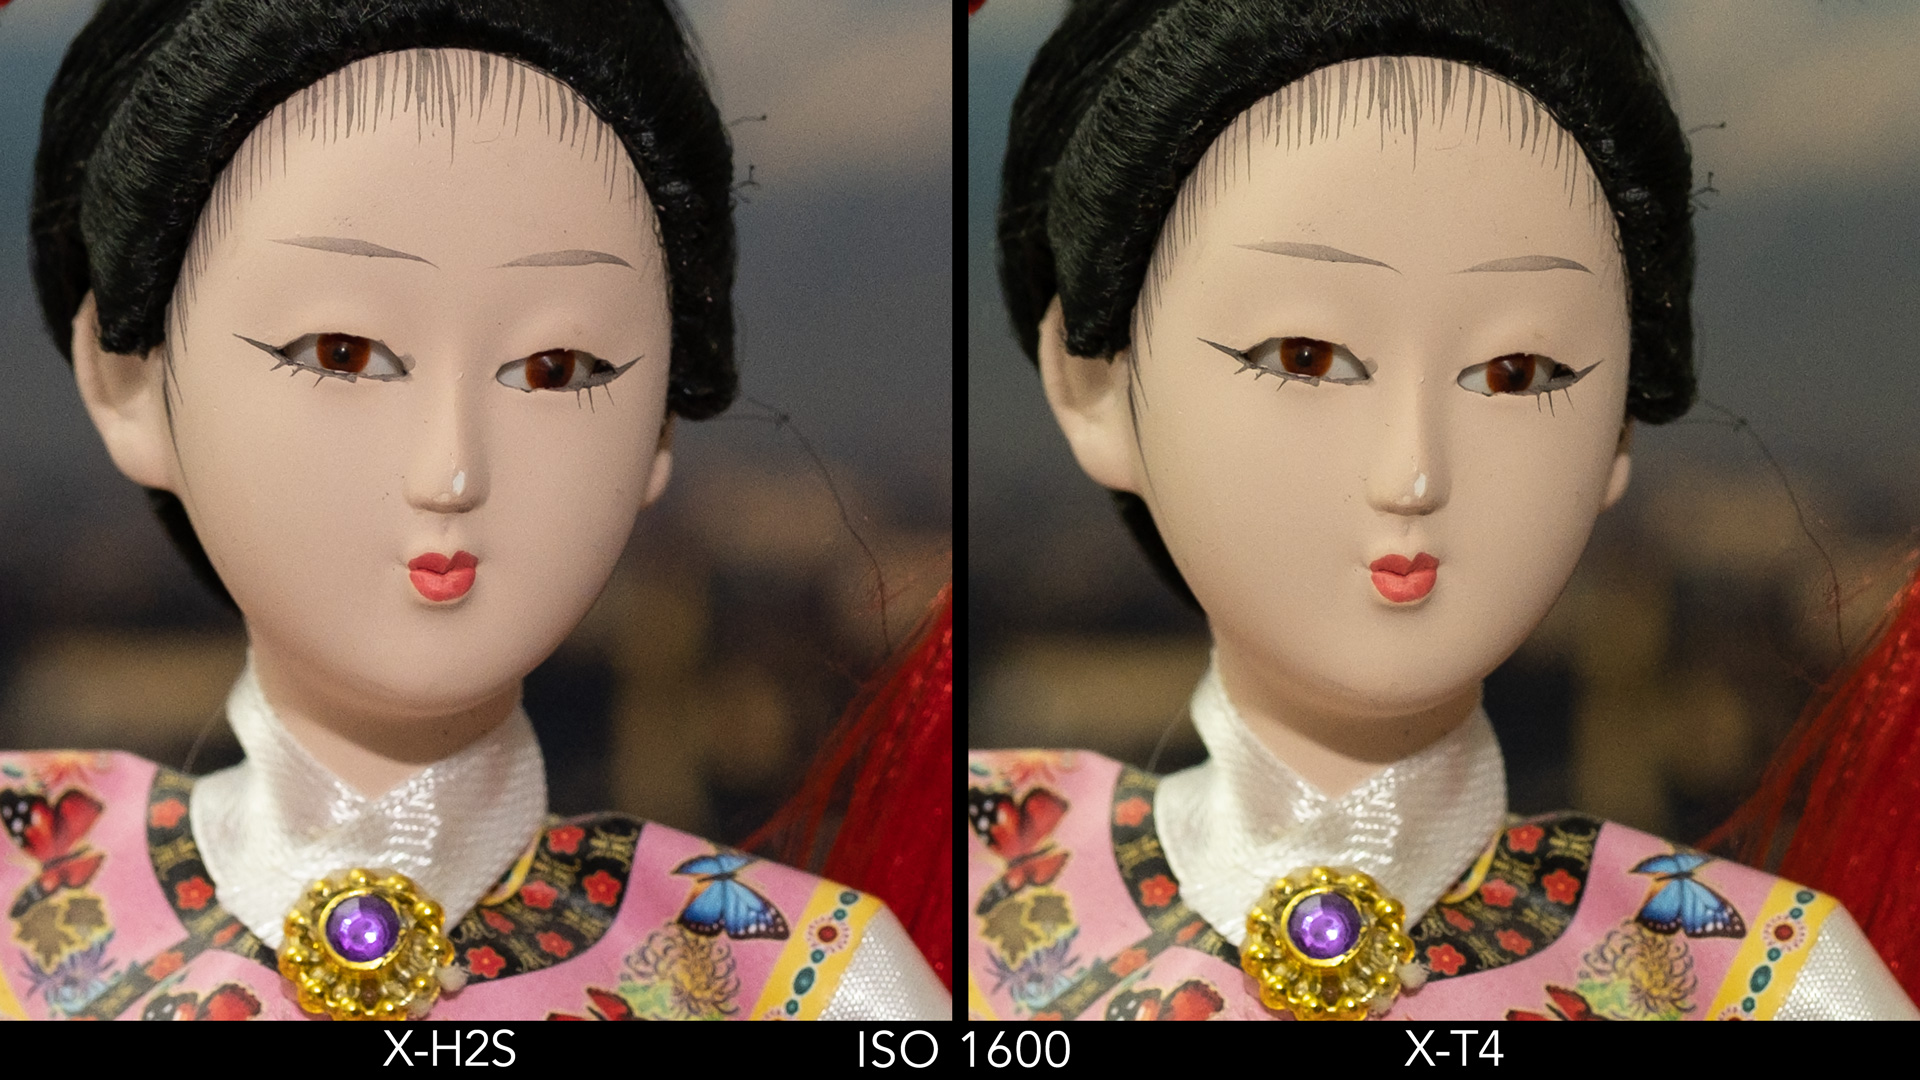 Side by side crop of the Japanese doll, showing the quality at ISO 1600 for the X-H2S and X-T4